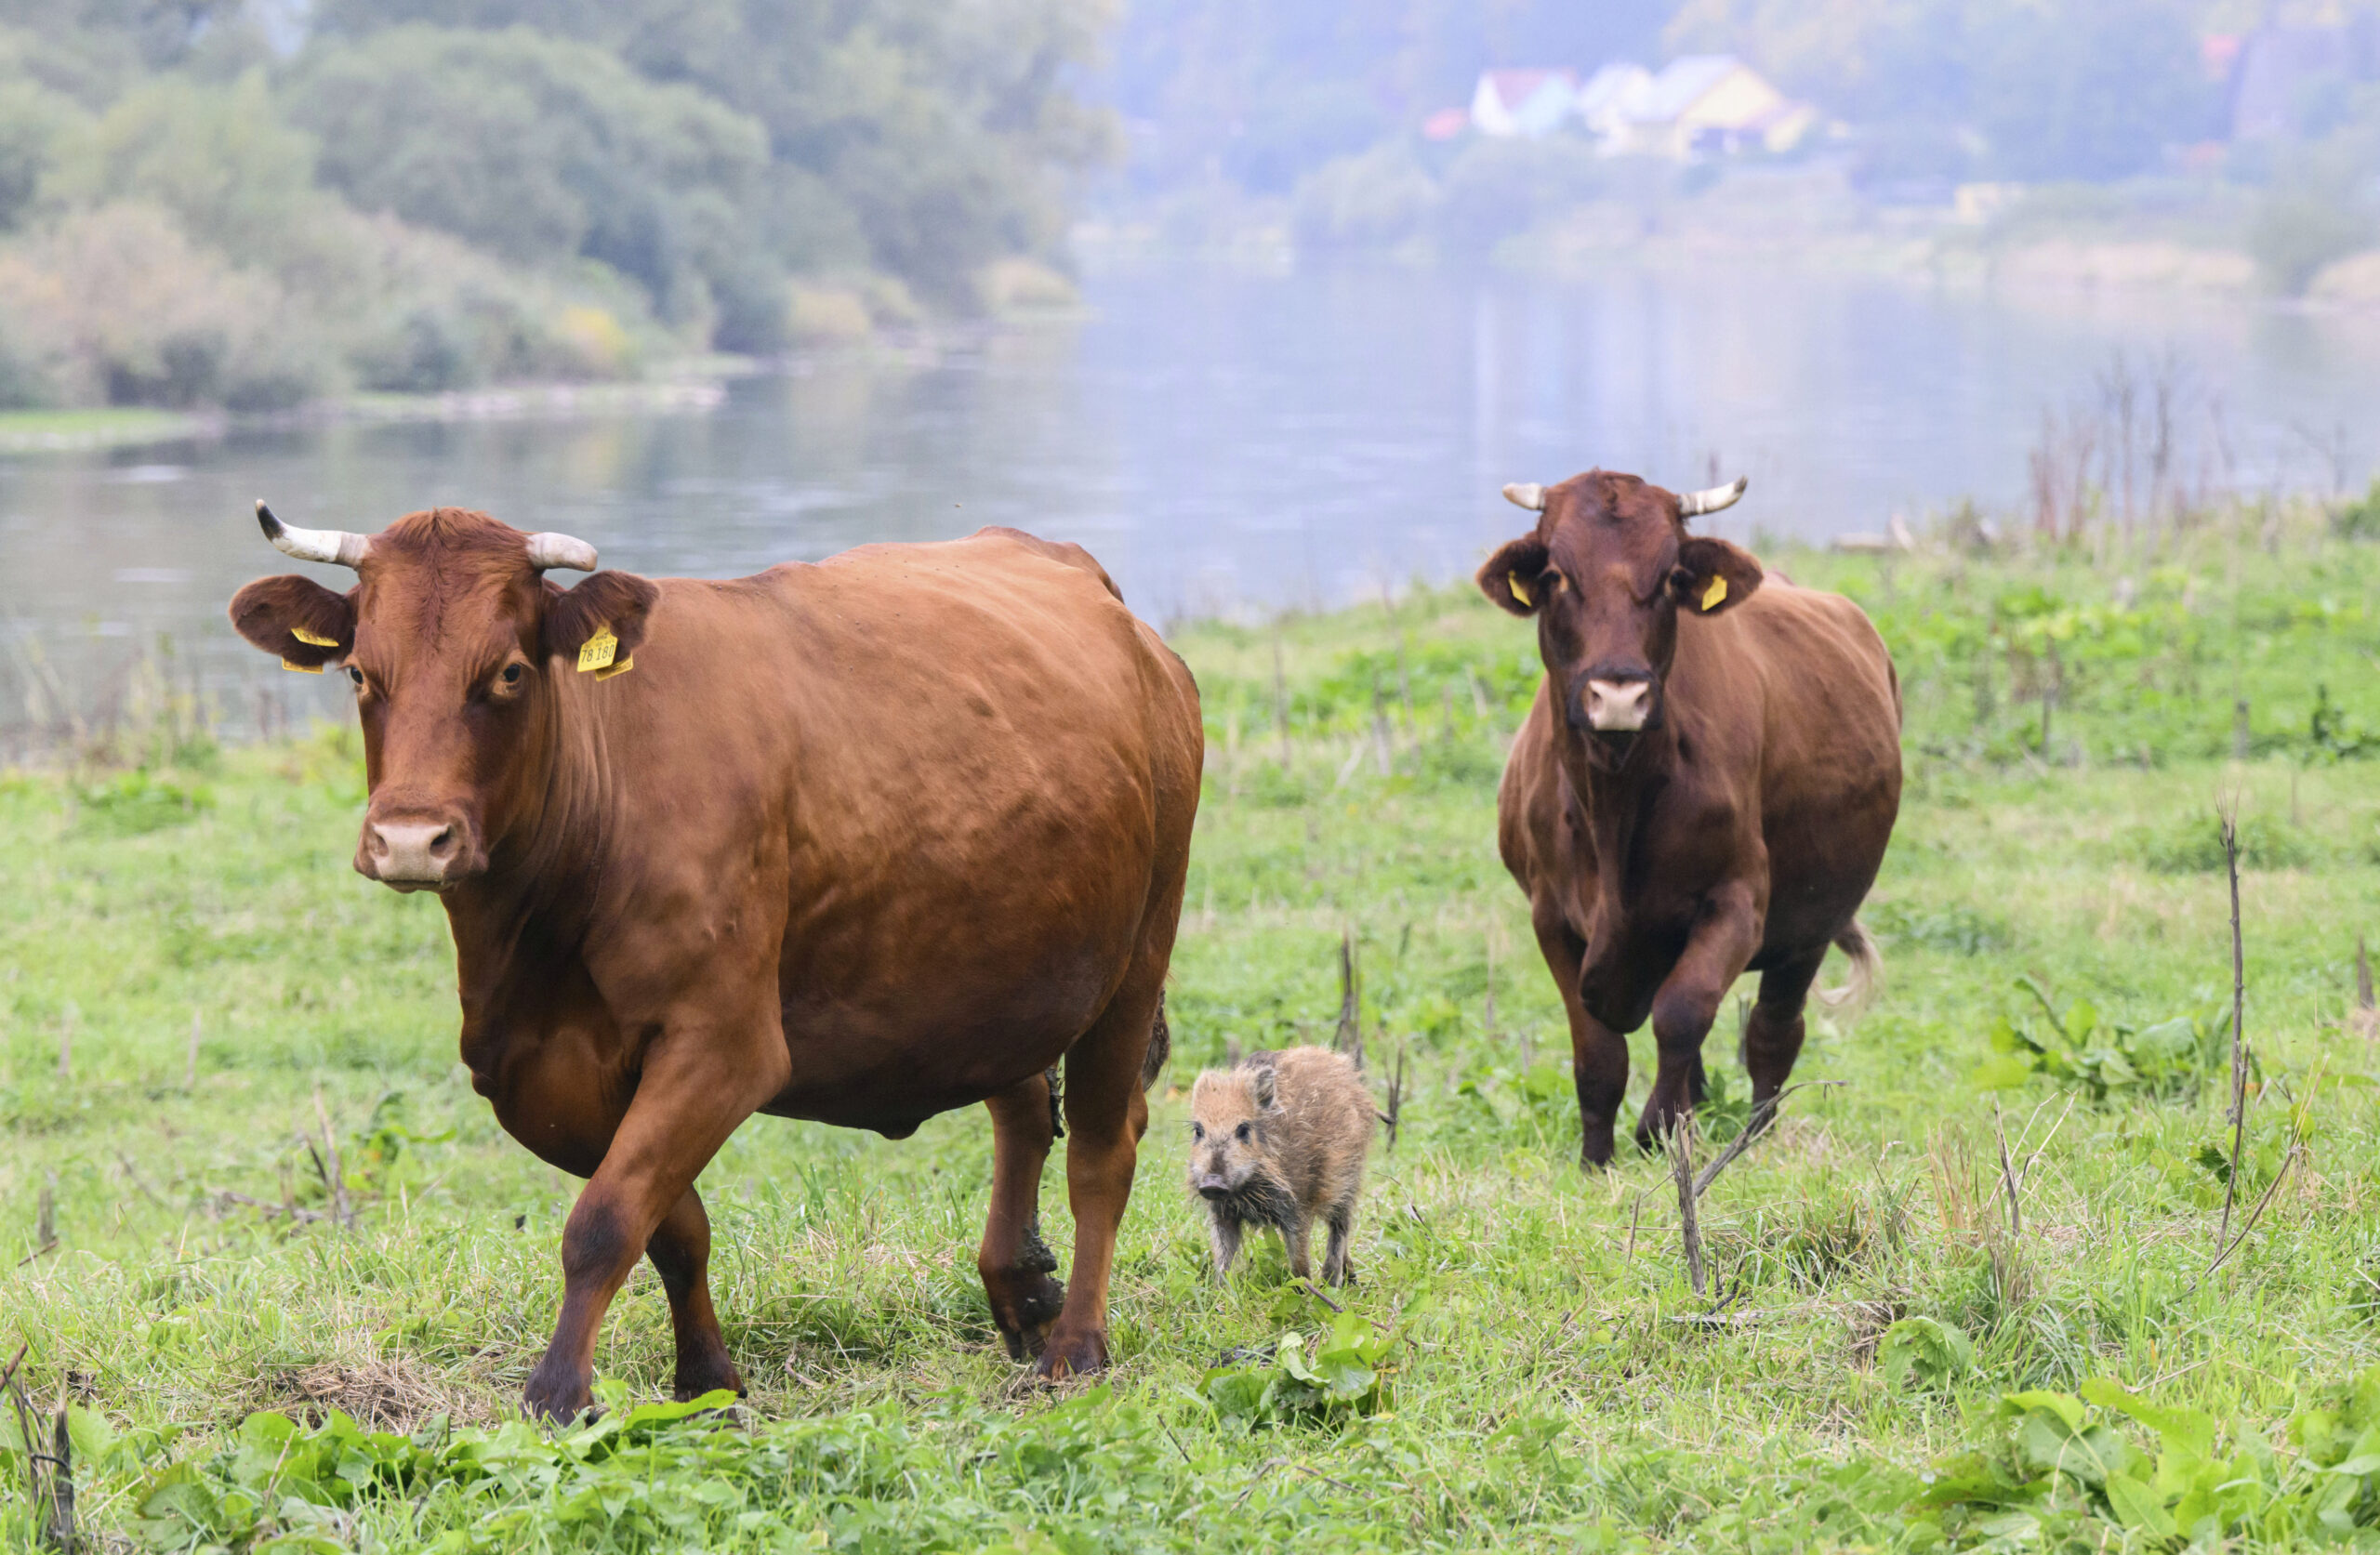 Wild boar "Frida" runs between two cows on a pasture near the river Weser in the district of Holzminden, Germany, Thursday, Sept. 29, 2022. A cow herd in Germany has gained an unlikely following, after adopting a lone wild boar piglet. Farmer Friedrich Stapel told the dpa news agency that he spotted the piglet among the herd in the central German community of Brevoerd about three weeks ago. It had likely lost its group when they crossed a nearby river. (Julian Stratenschulte/dpa via AP)